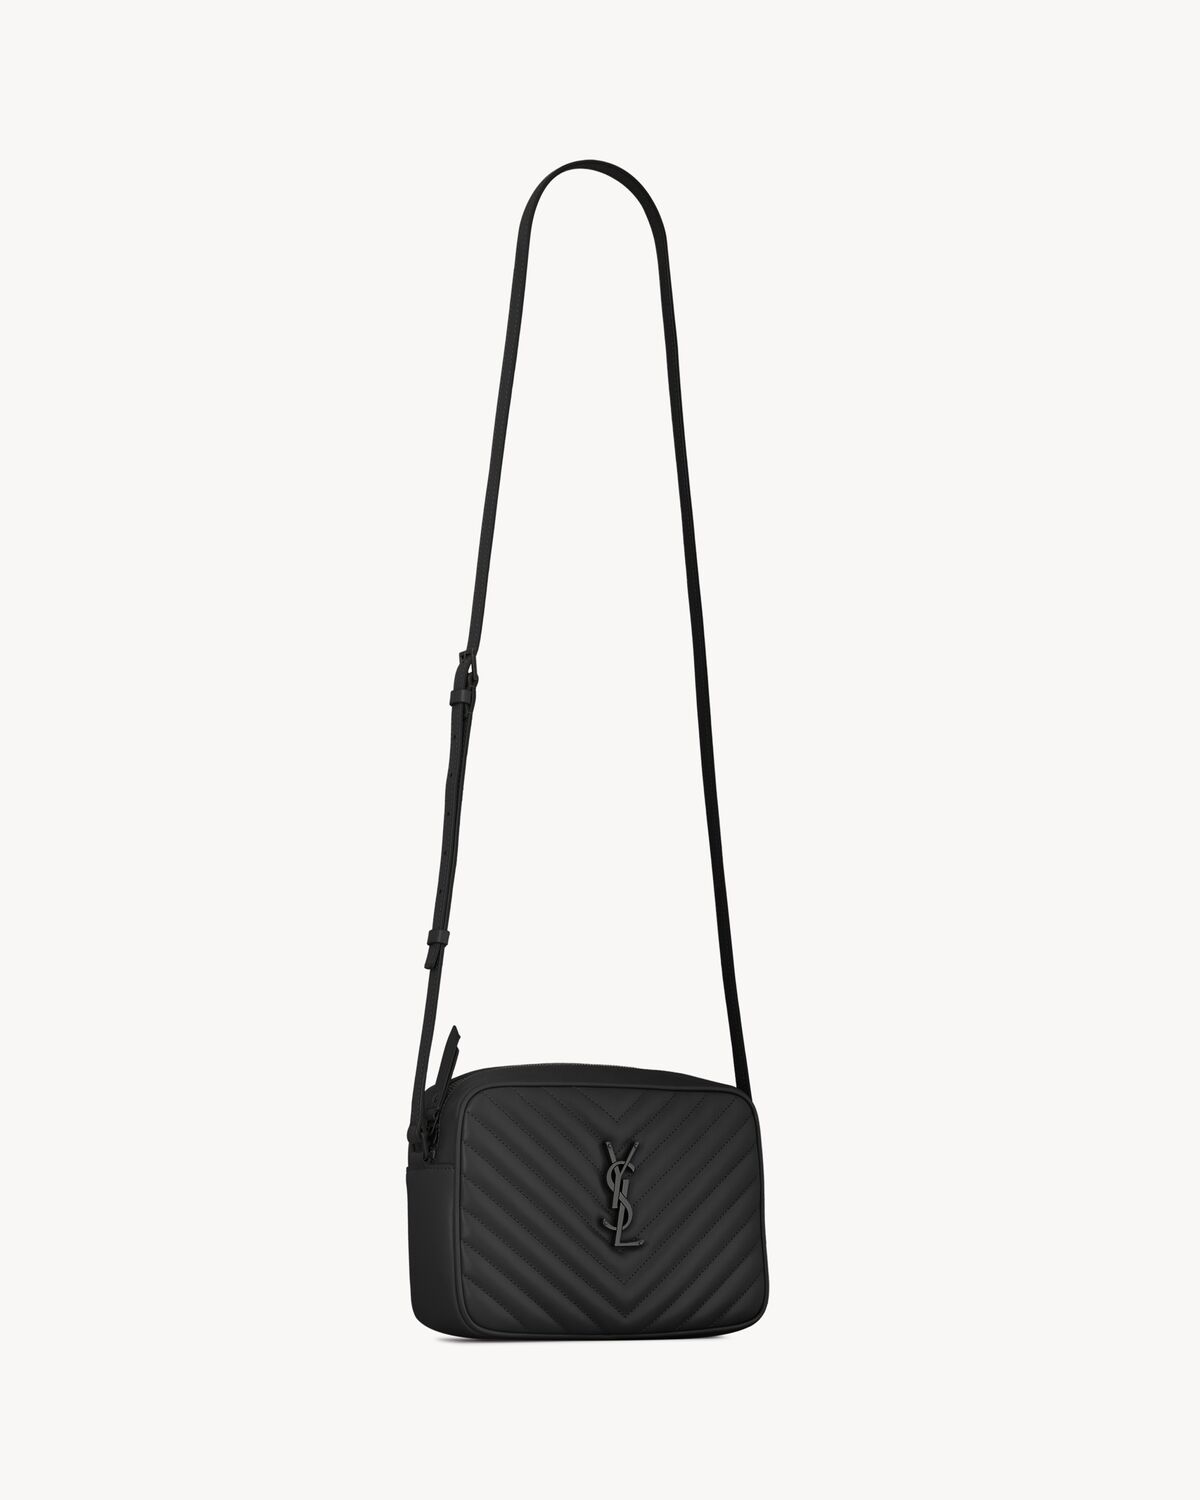 LOU camera bag in quilted leather